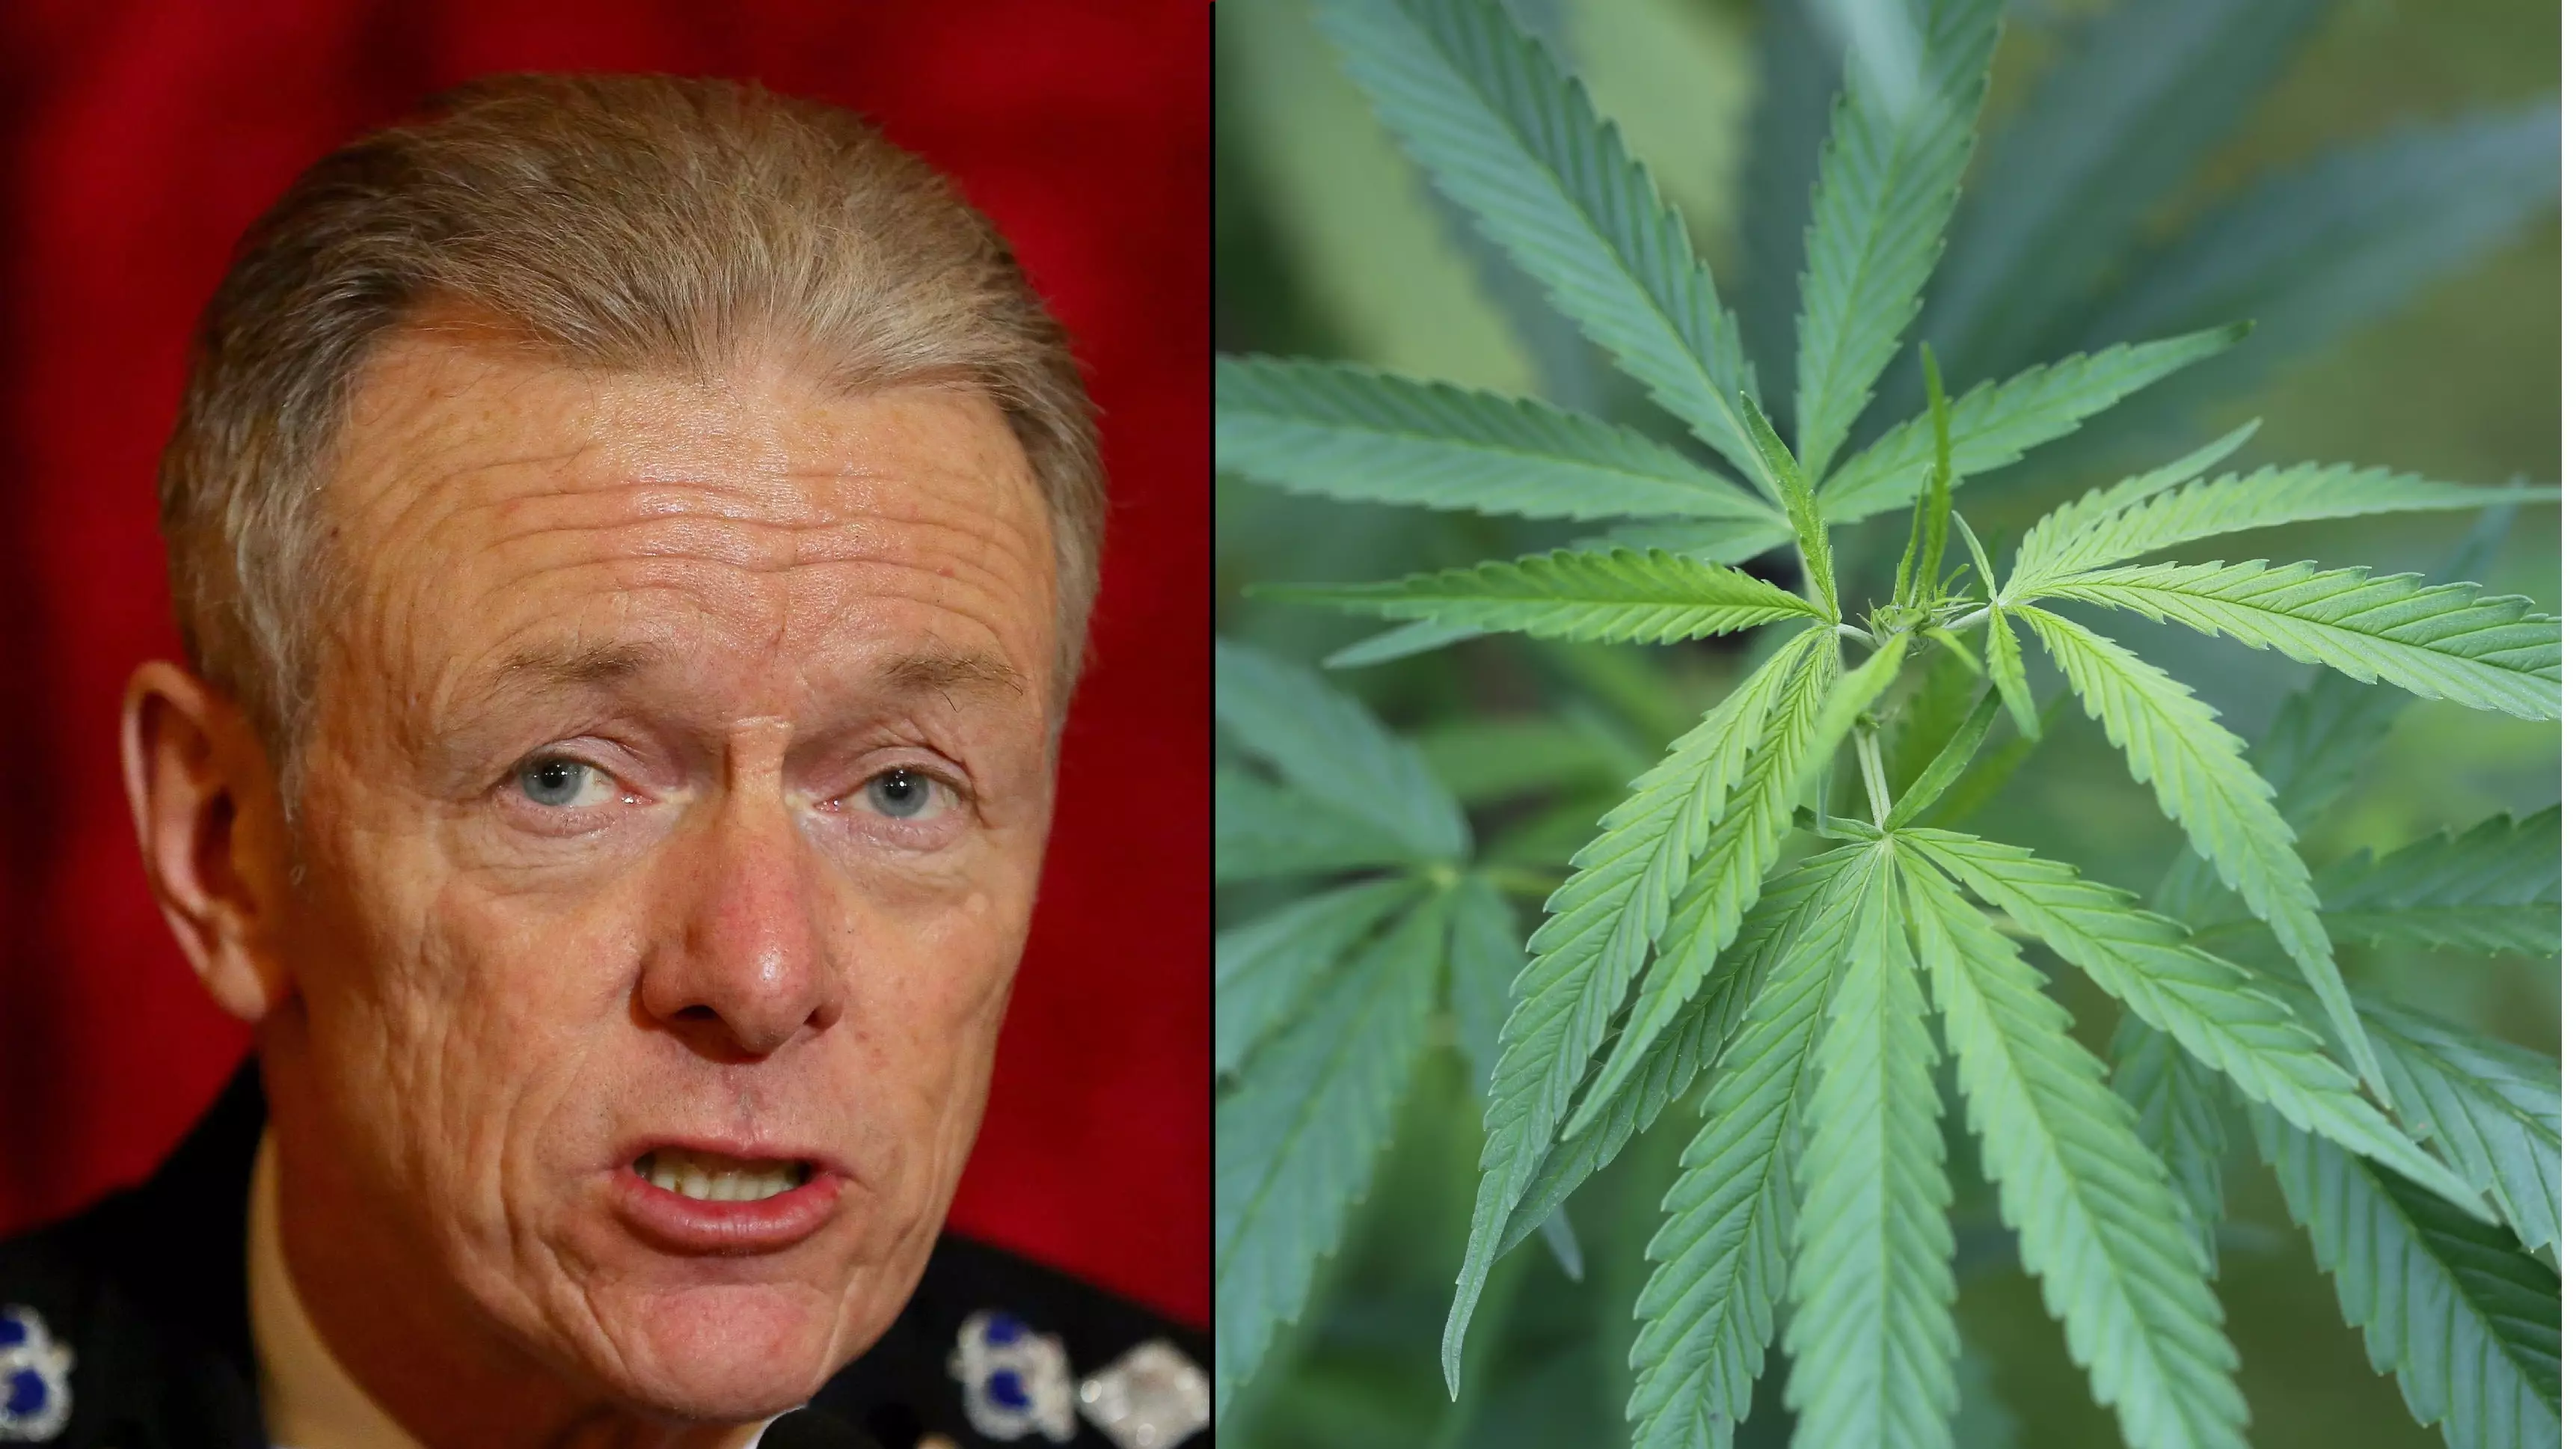 Former Police Chief Calls For 'Urgent Review' Into UK Cannabis Laws